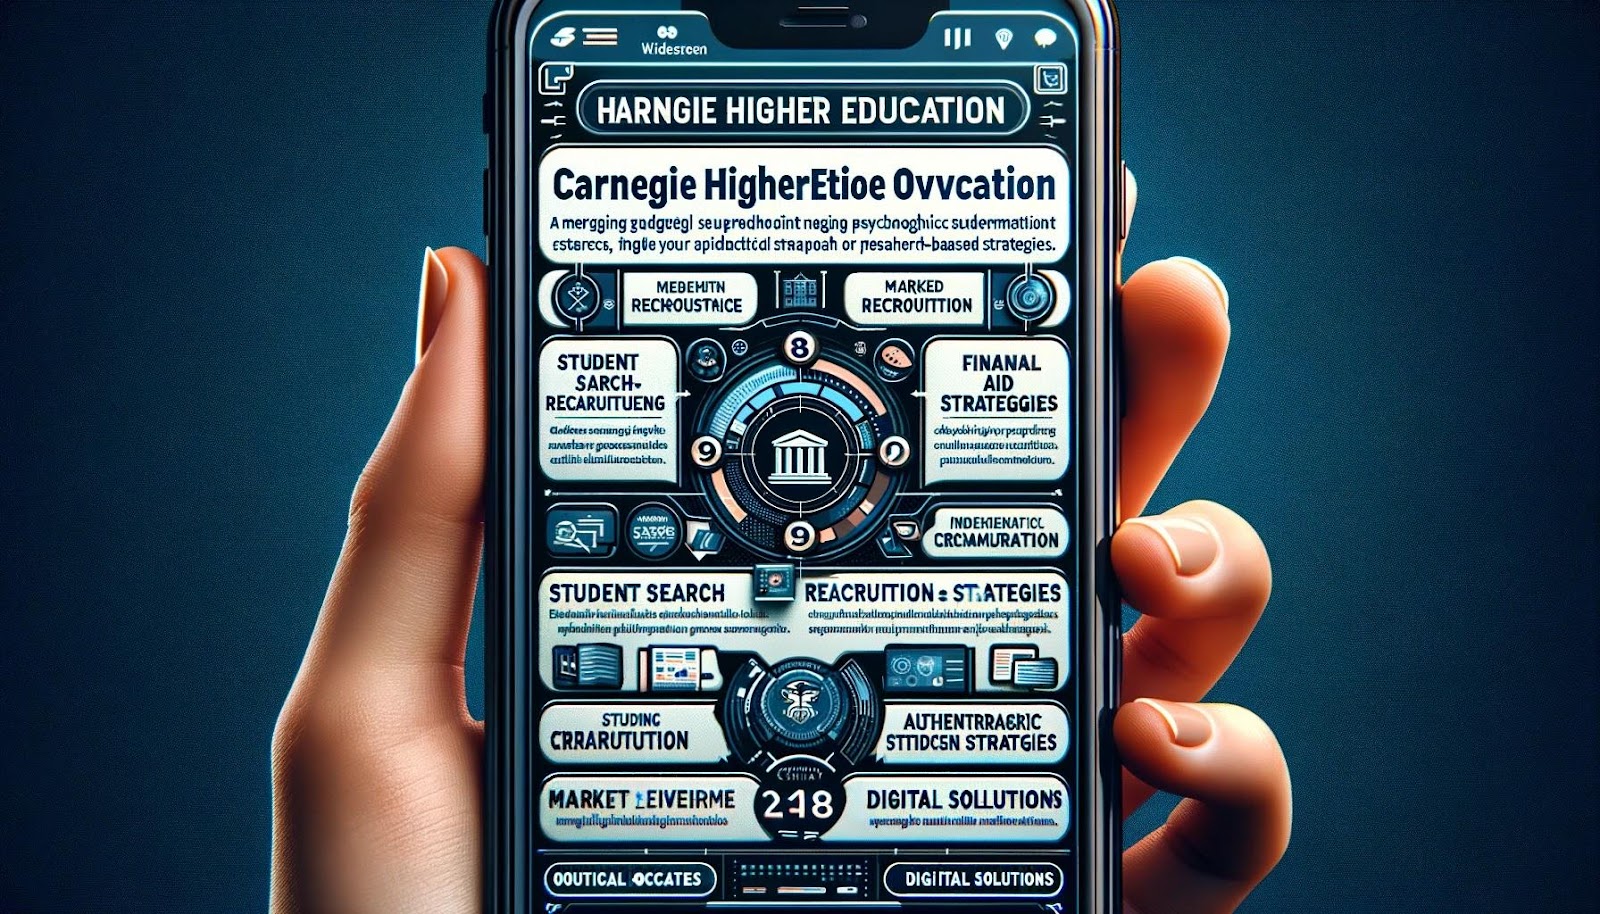 A widescreen digital phone-styled snapshot showcasing the 'Carnegie Higher Education Overview' theme. The display includes a summary of the company's extensive experience in higher education marketing and their dedication to research-based strategies. It features sections for services like student search, recruitment, financial aid strategies, market research, and digital solutions. Emphasize the unique approach of merging psychographic student research with various digital and operations strategies. Illustrate outcomes like improved student recruitment, broader audience reach, and authentic institutional representation. The design should have a sleek, modern look with the brand color and logo, reflecting technological prowess.